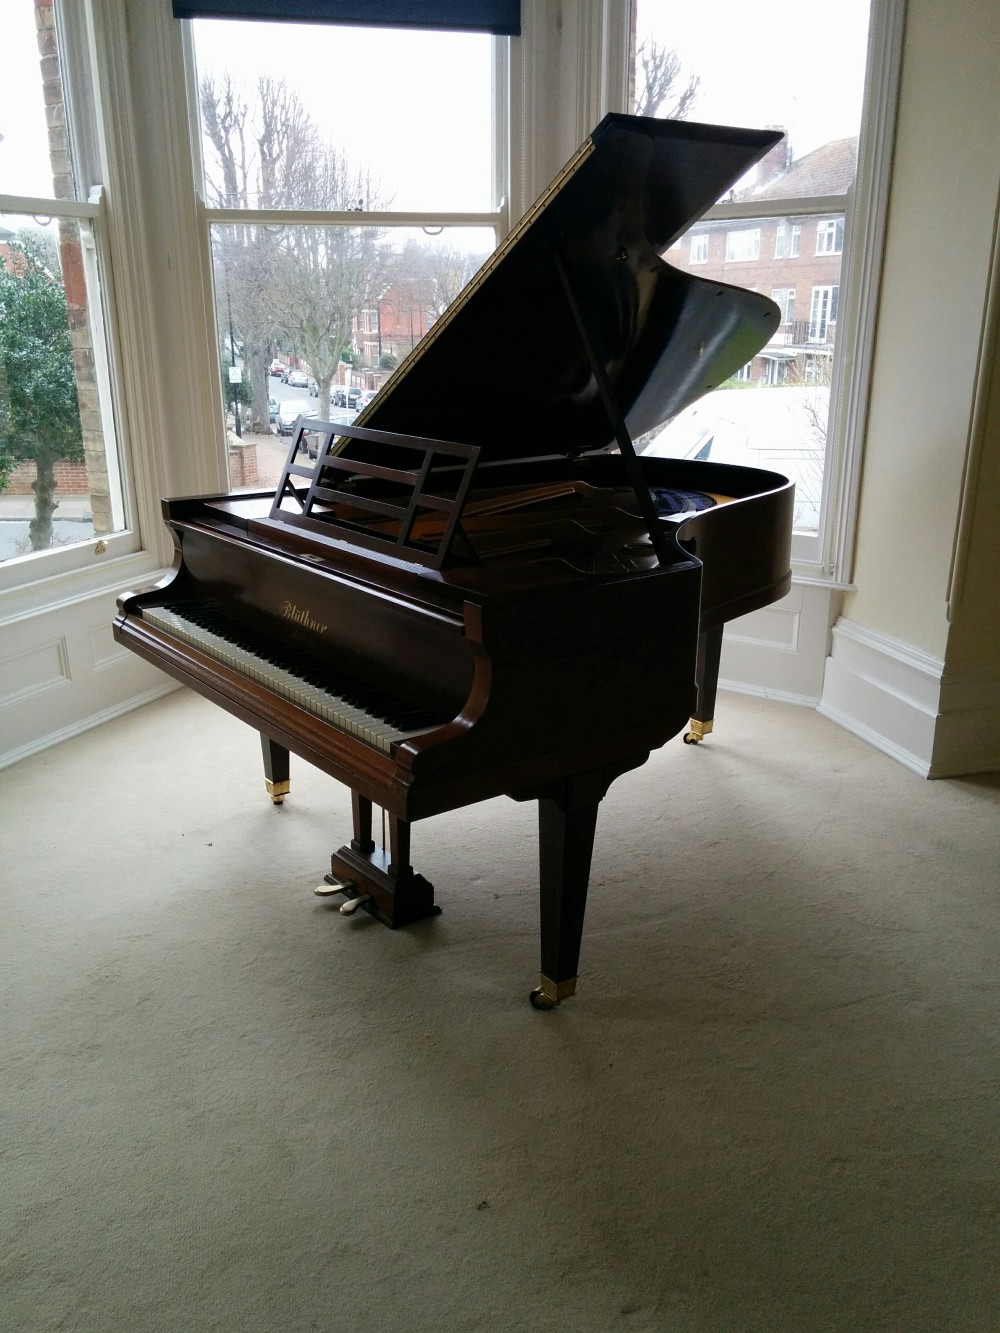 The 'boudoir' grand piano in its new home